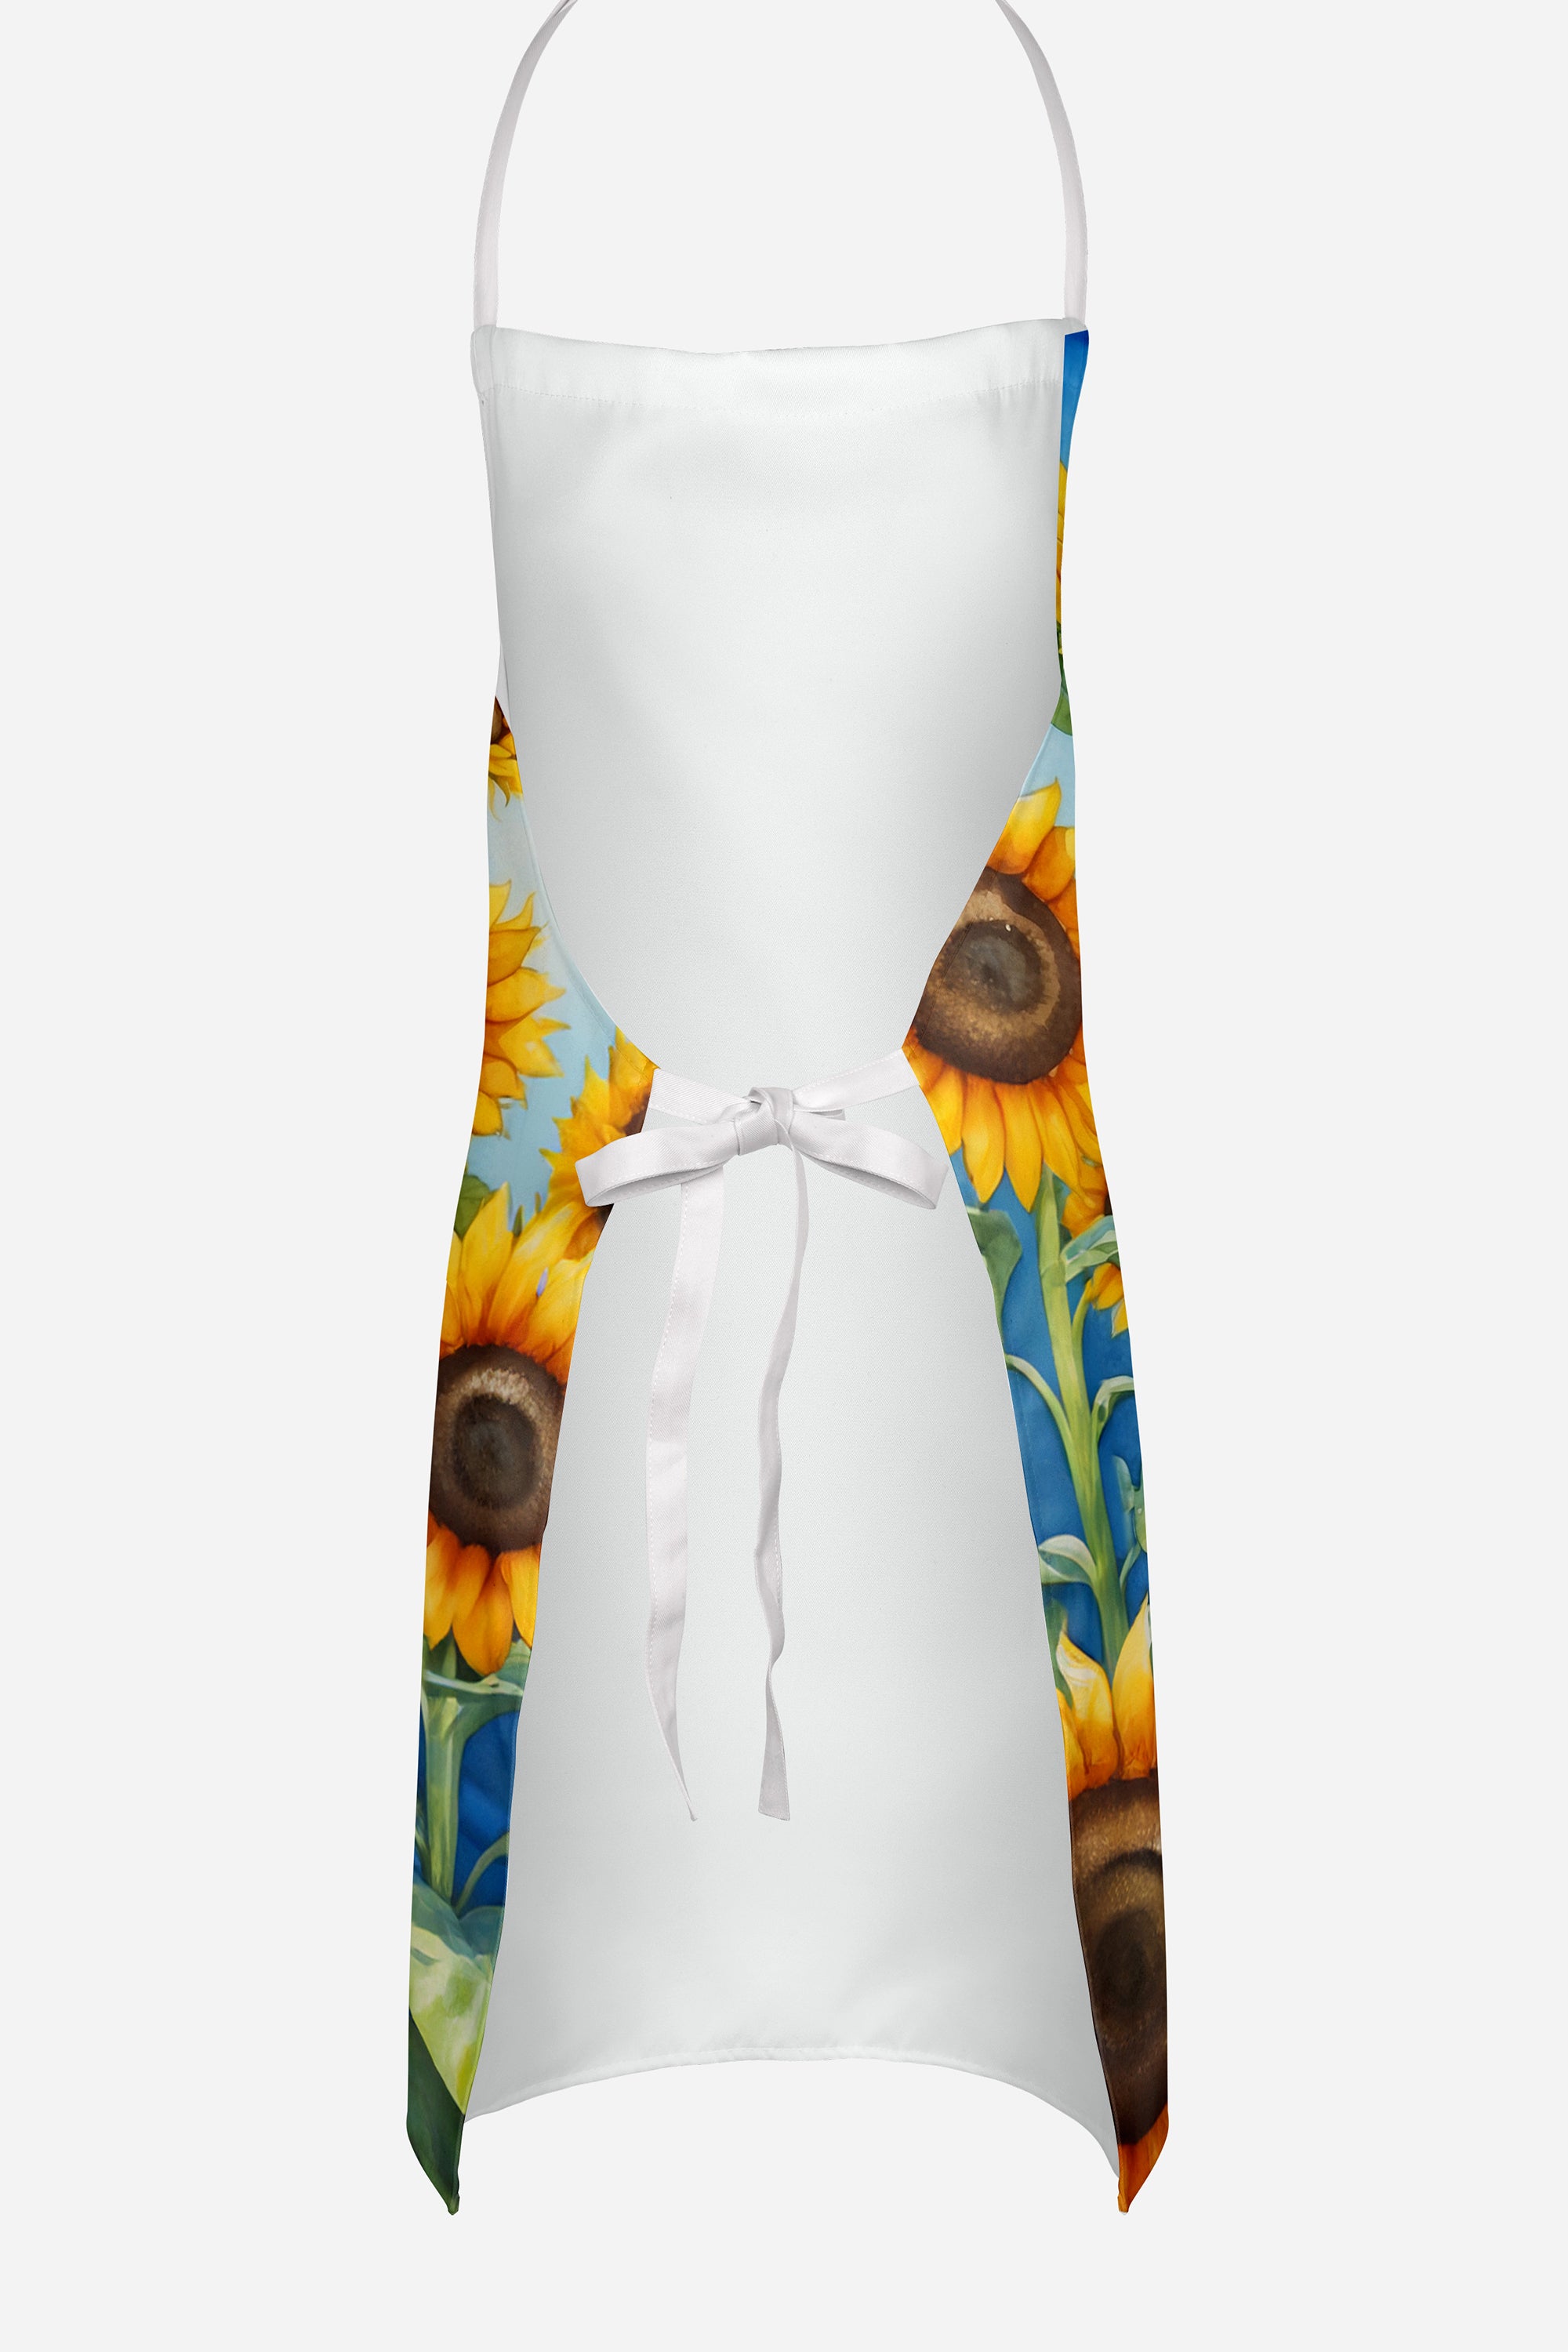 Pit Bull Terrier in Sunflowers Apron